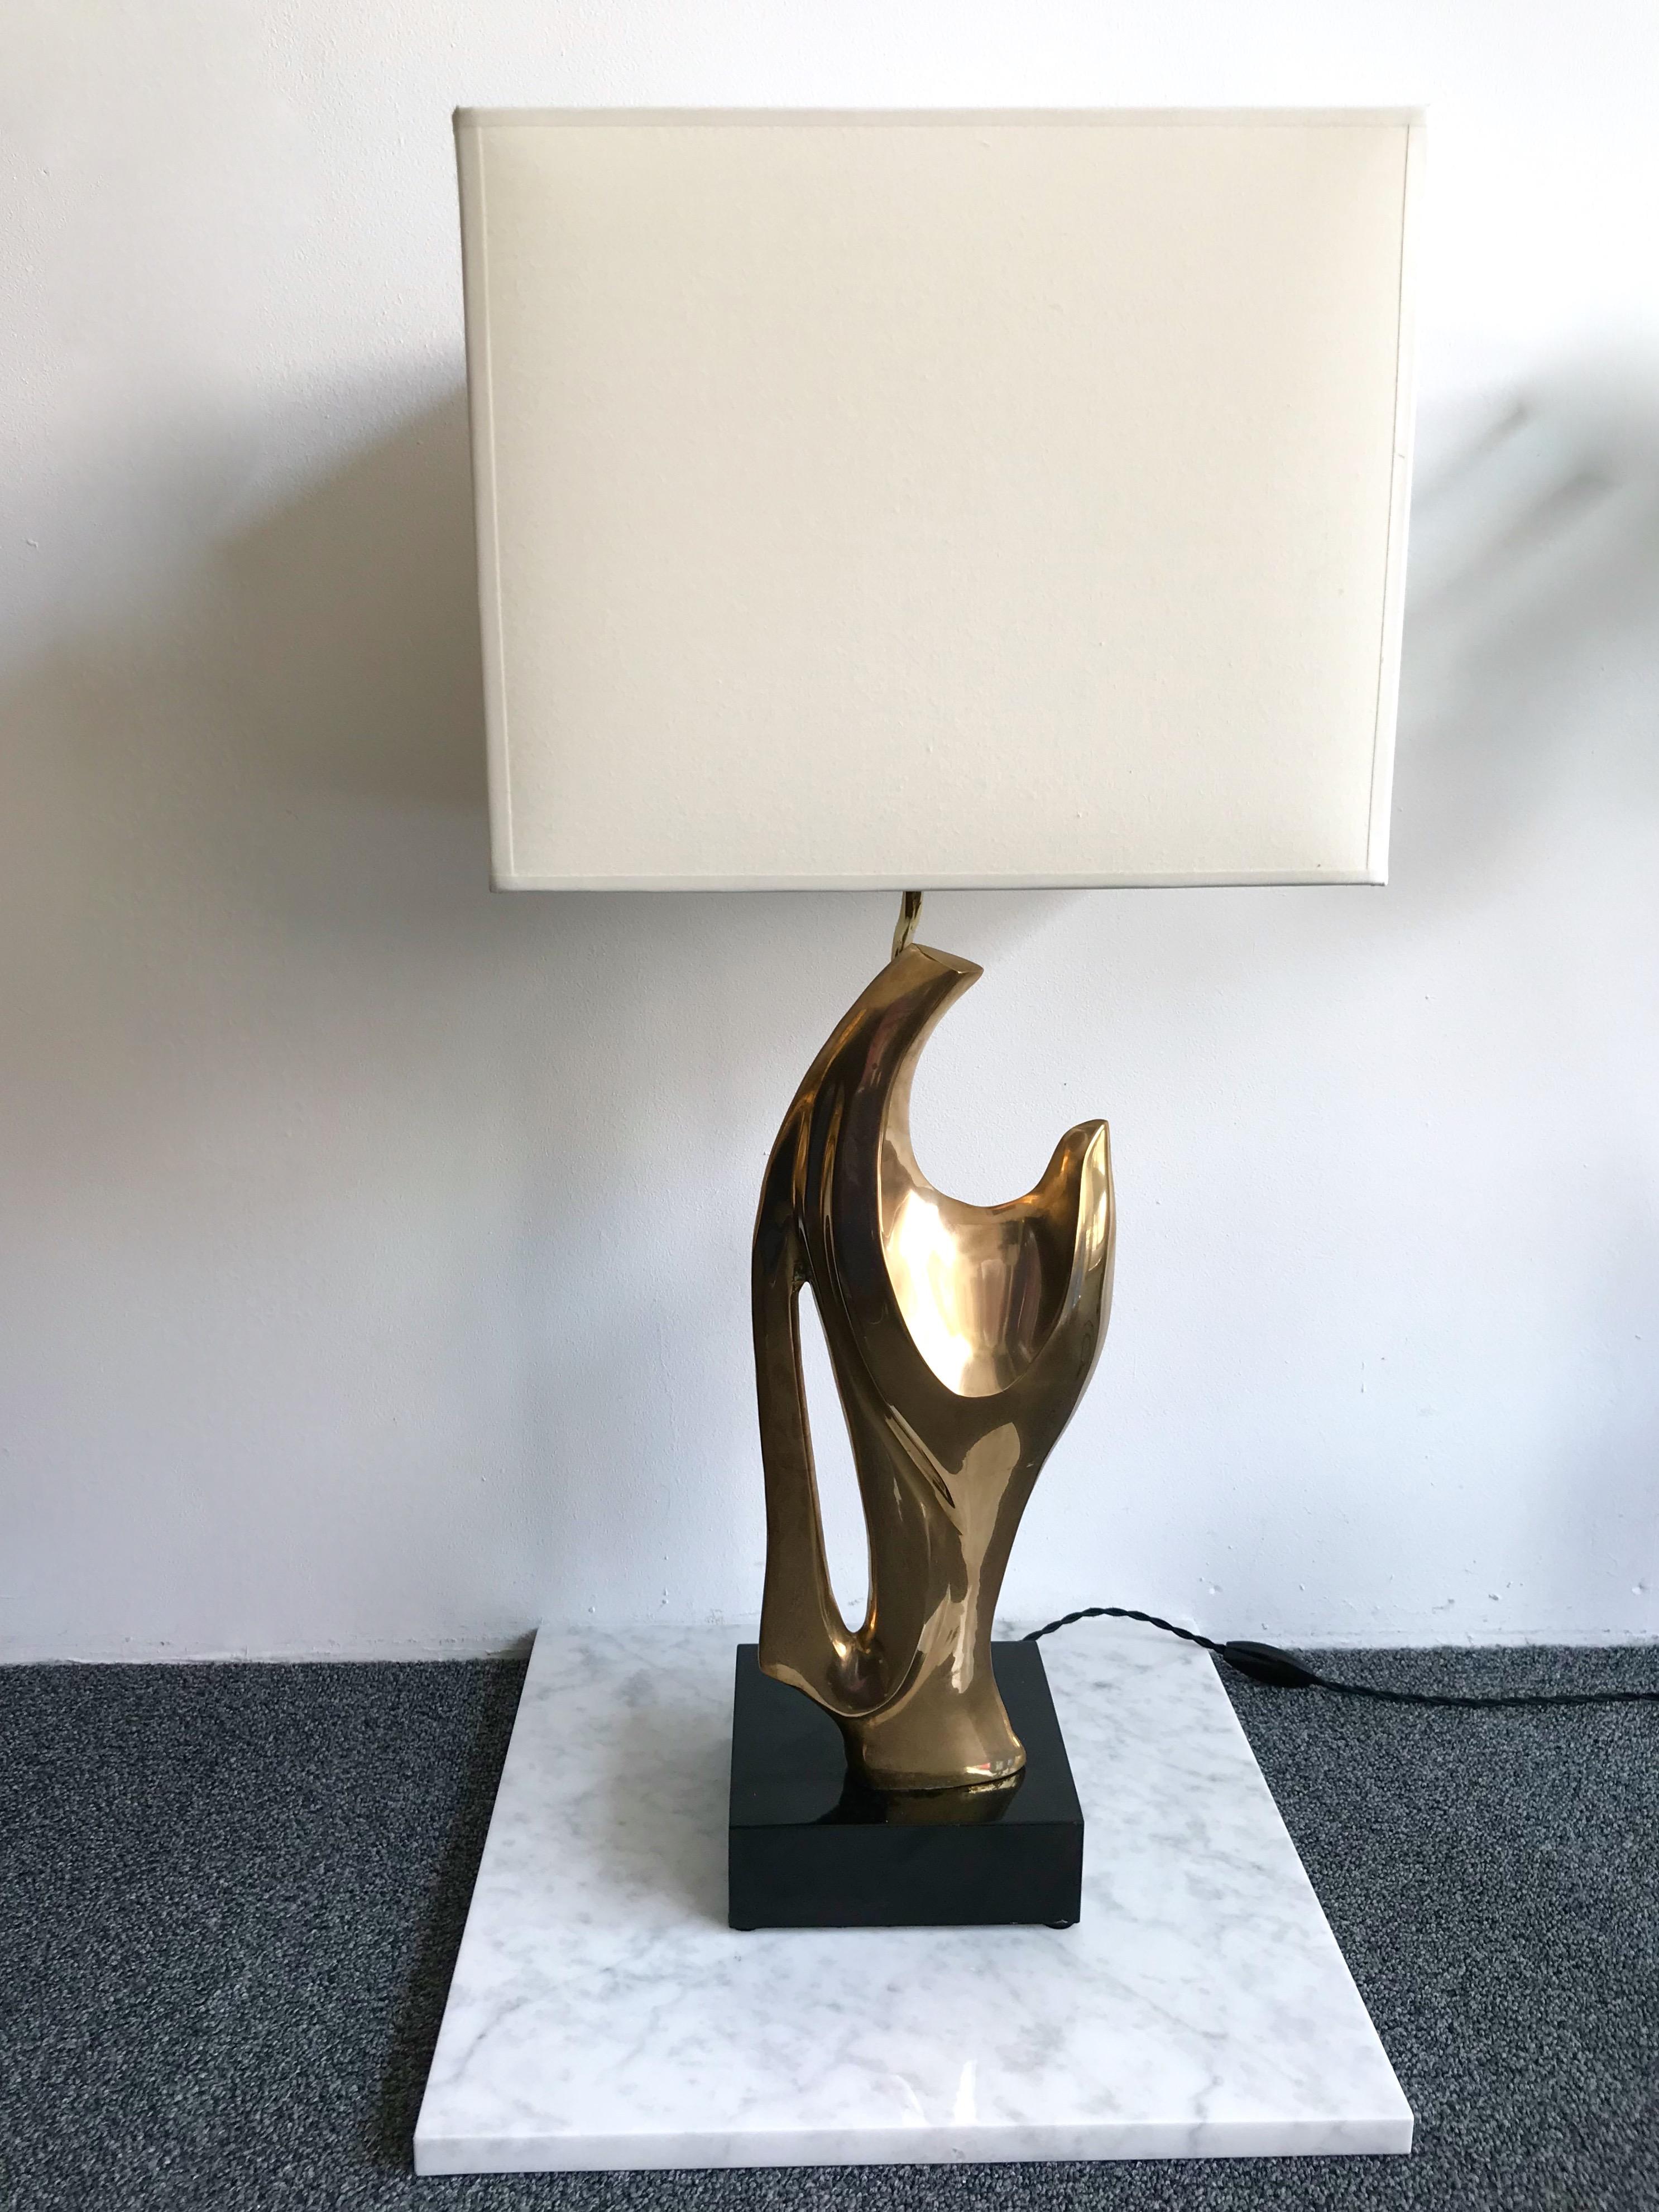 Rare pair of bronze sculpture lamps by the artist Alain Chervet. A left and right lamp, the bronzes are identical but are mounted on opposite sides, very elegant. Black lacquered base. Famous design like Maison Charles, Jansen, Willy Rizzo,